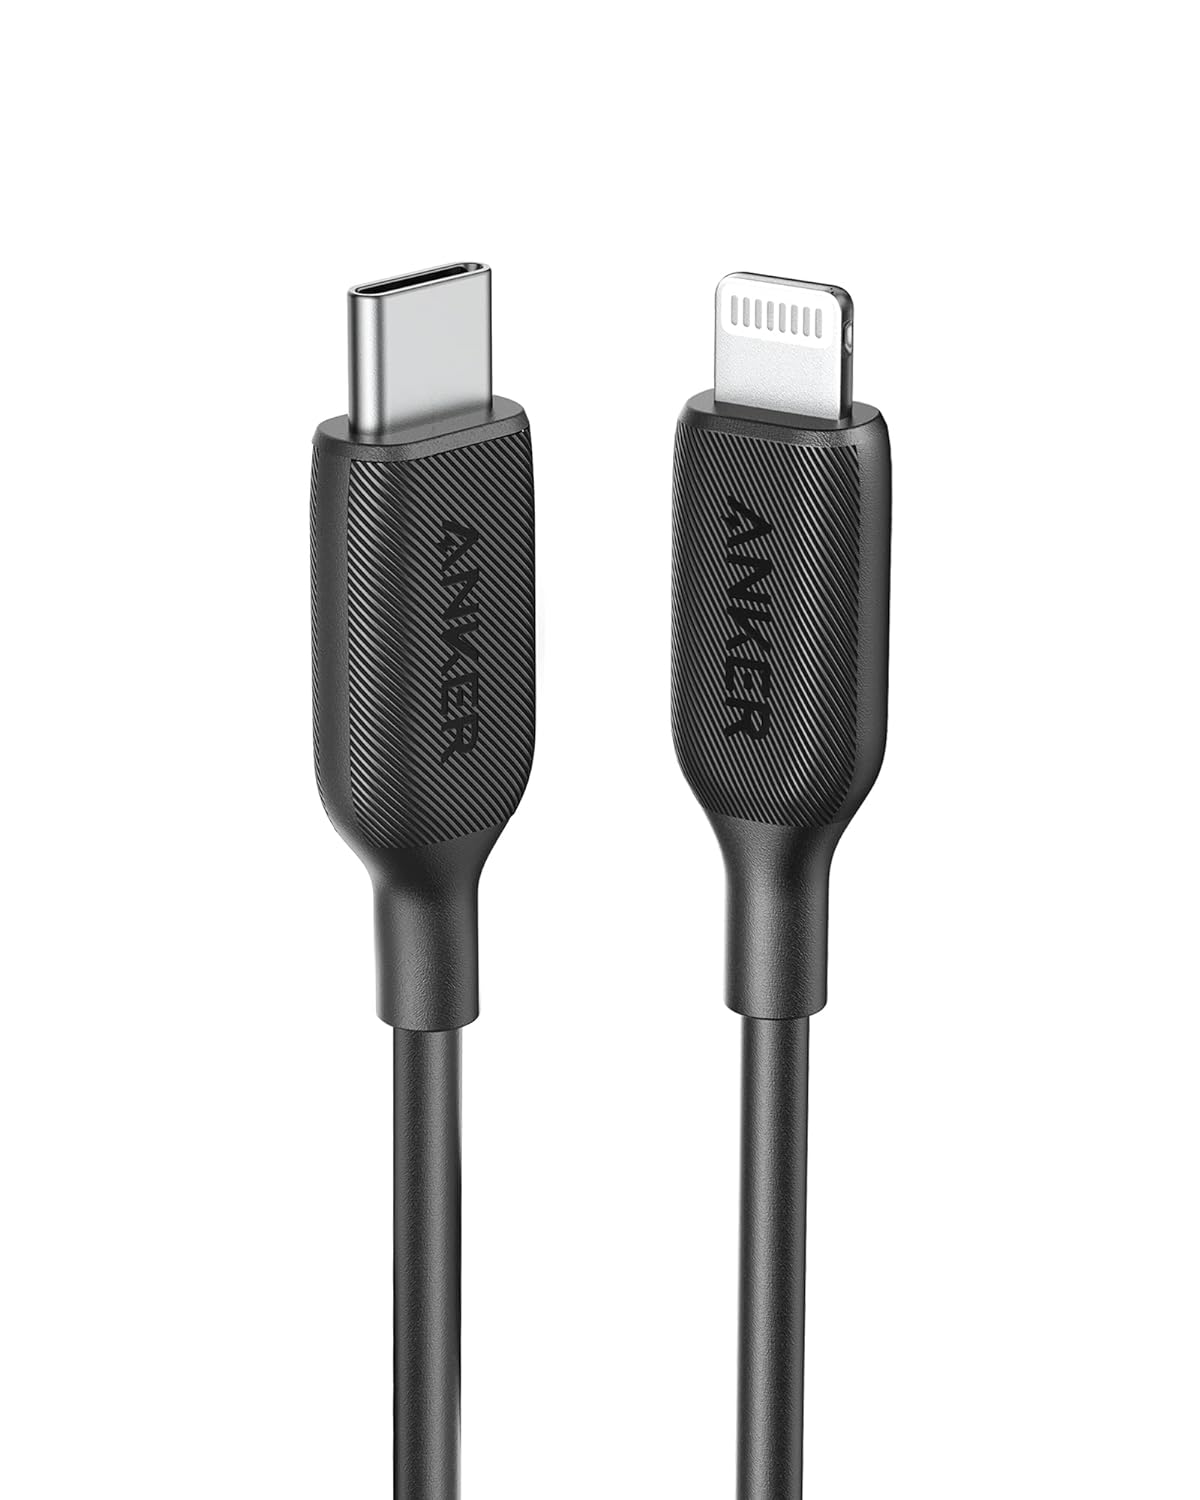 ANKER MFi Certified Type C to Lightning Cable 3ft Black